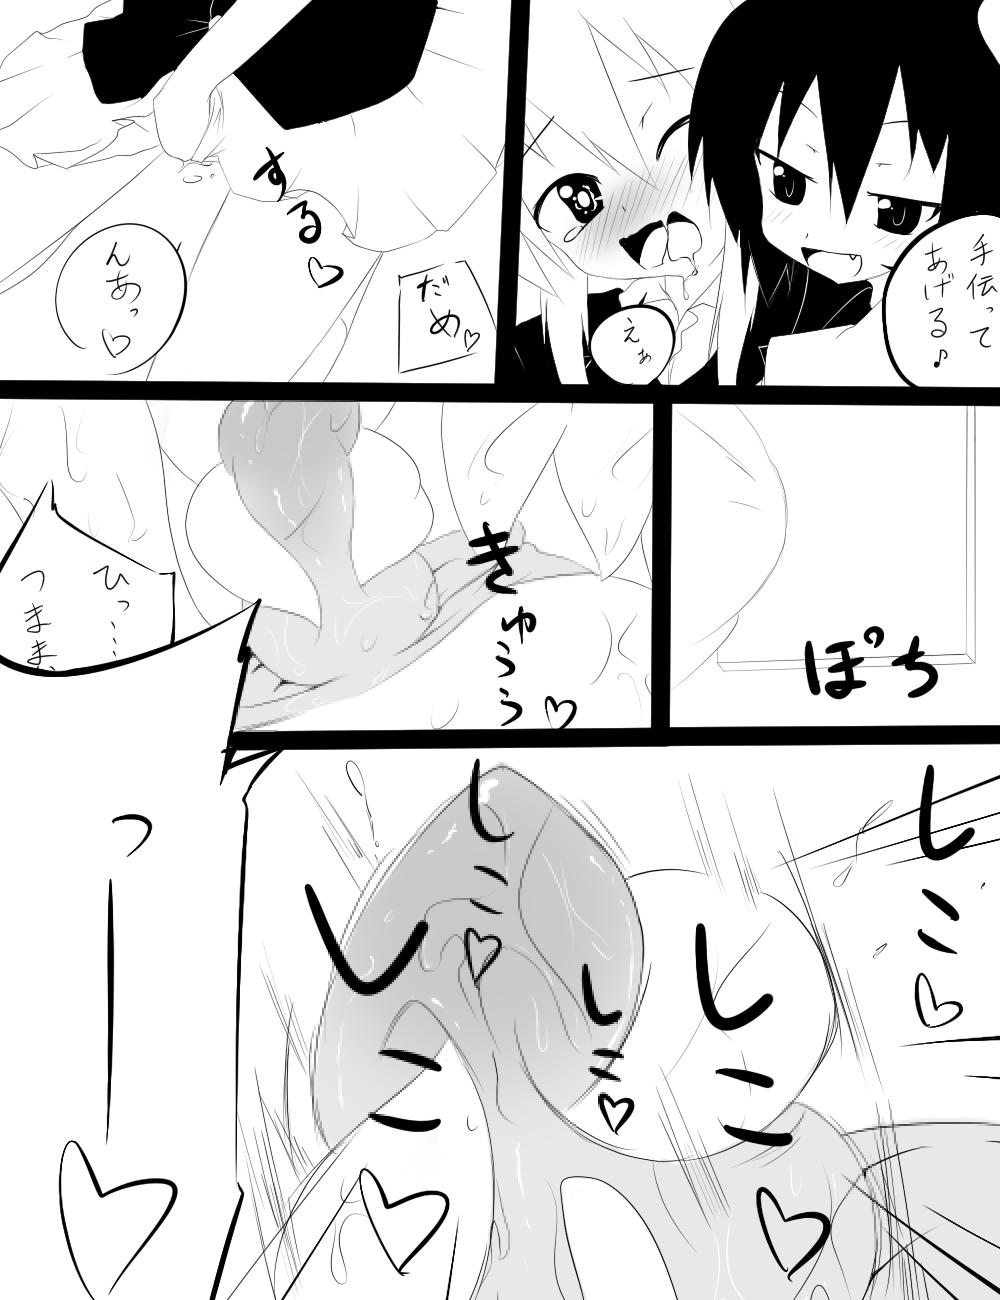 Mature Woman 因幡ﾀﾀﾞ同人第三弾完成　「永遠亭触　うどんげ編」 - Touhou project Family Taboo - Page 11